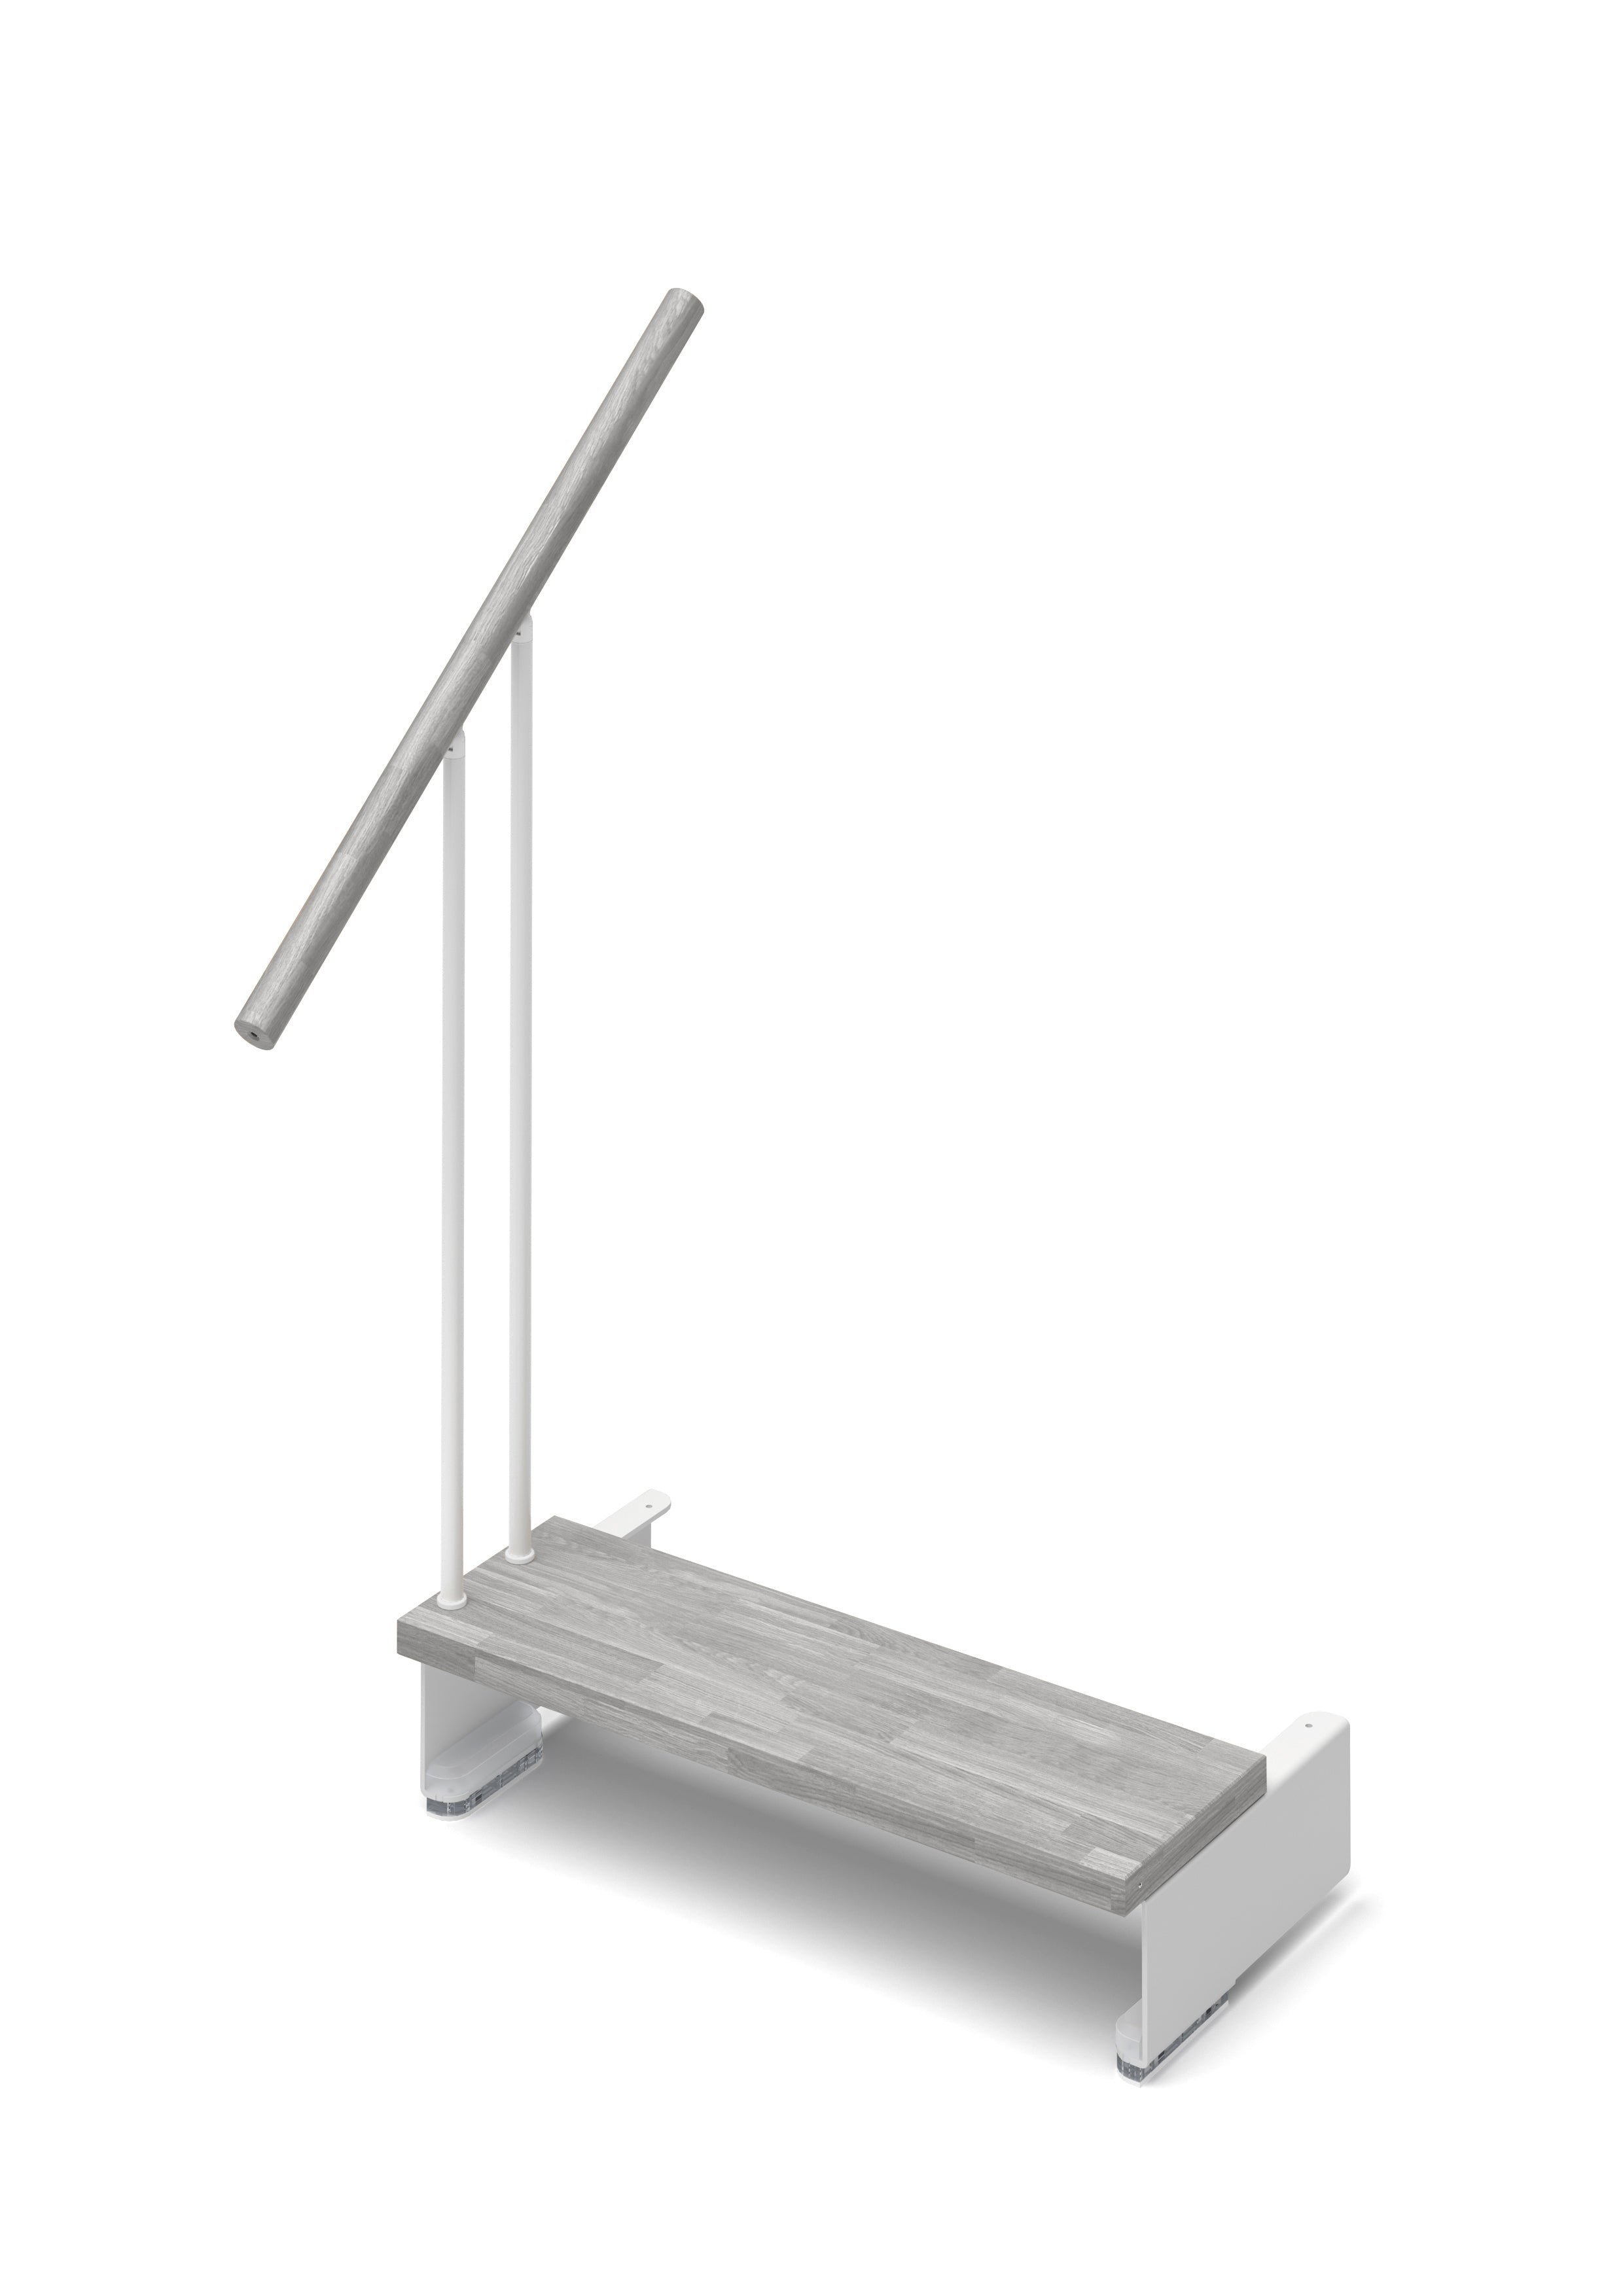 Additional step Adapta 74cm (with structure and railing) - Cement 89